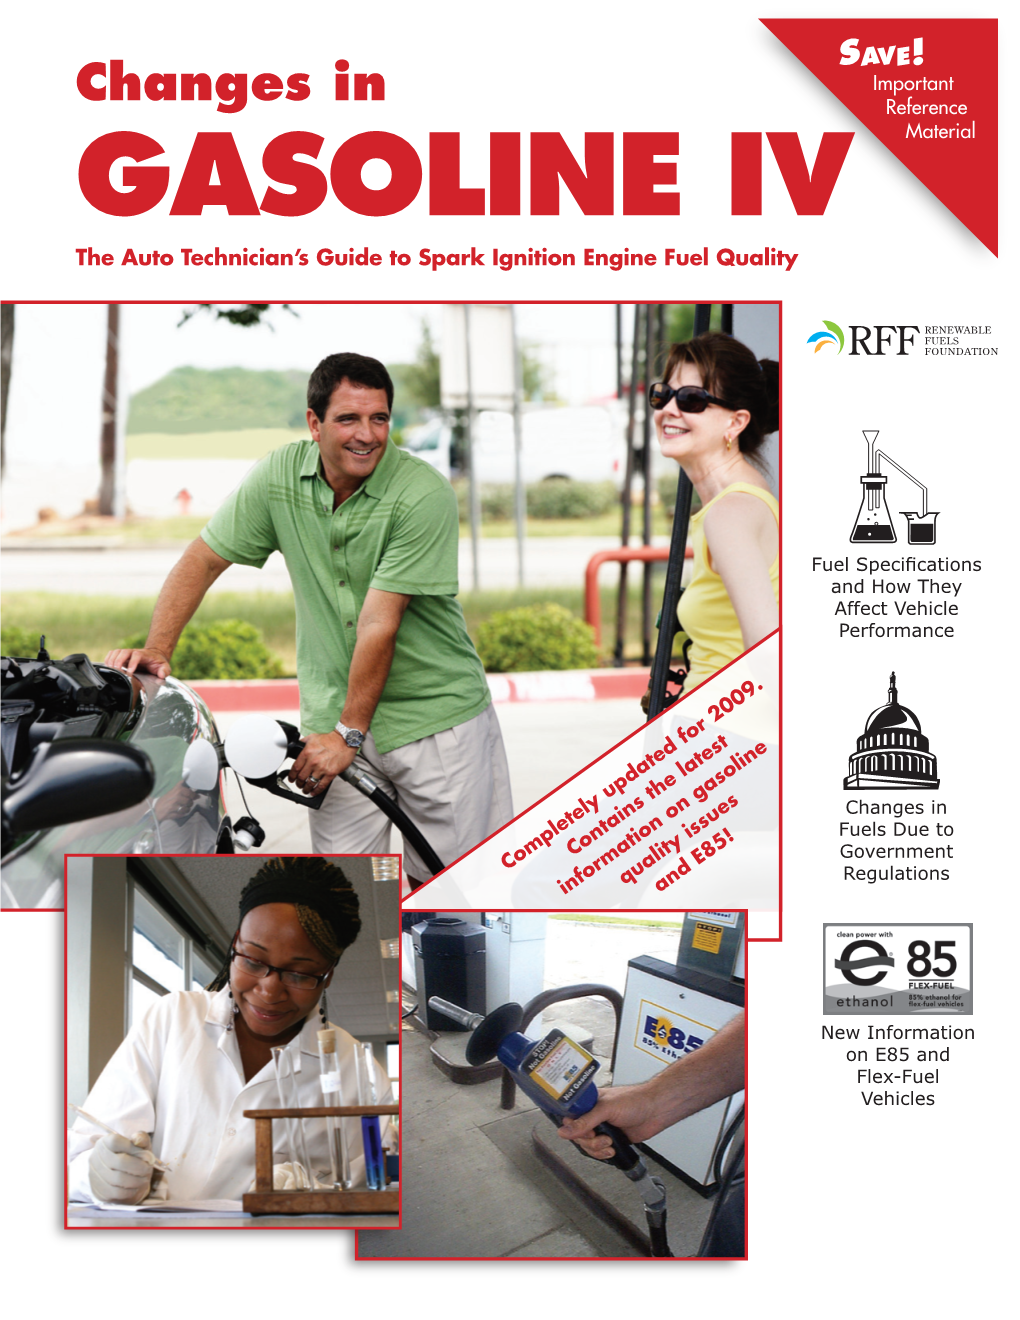 Changes in Gasoline IV” Is the 2009 Edition of the Ongoing Series of “Changes in Gasoline” Manuals